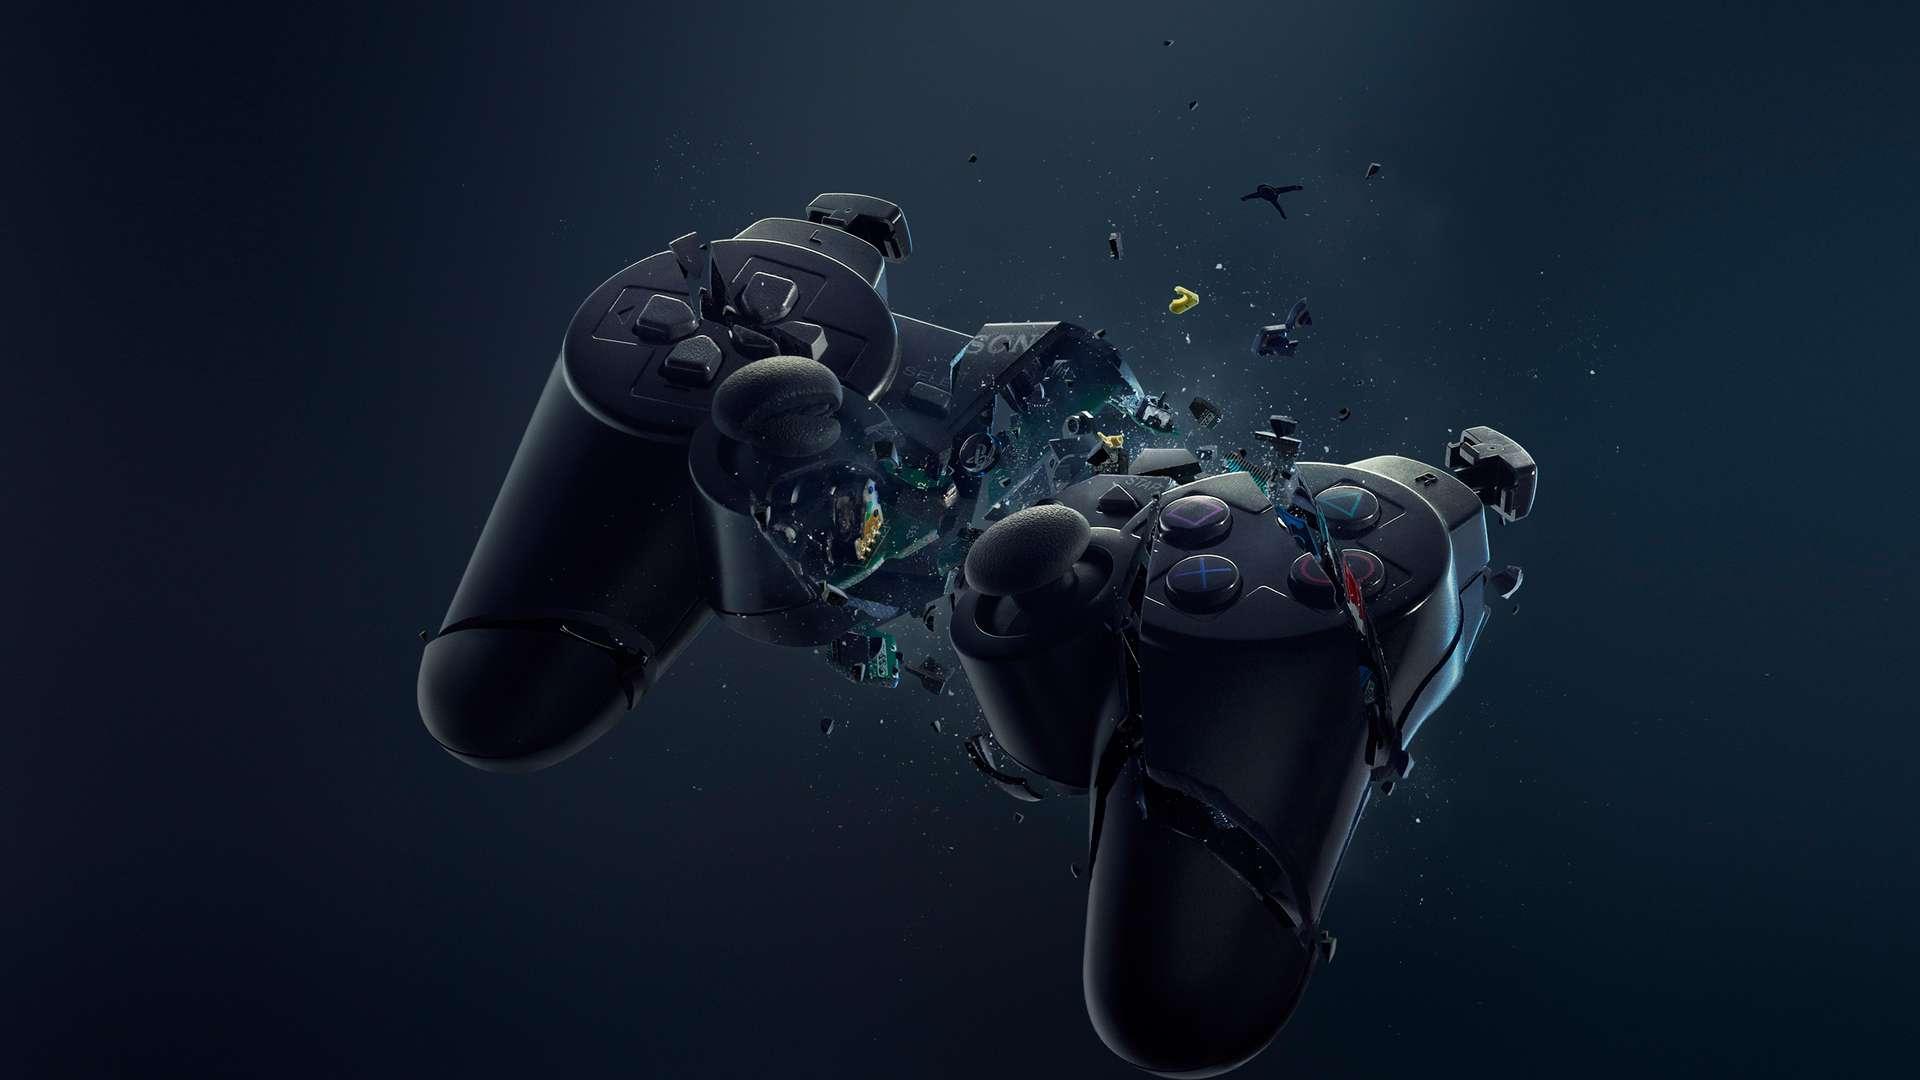 Playstation Controller Wallpapers Top Free Playstation Controller Backgrounds Wallpaperaccess Pngtree offers hd game controller background images for free download. playstation controller wallpapers top